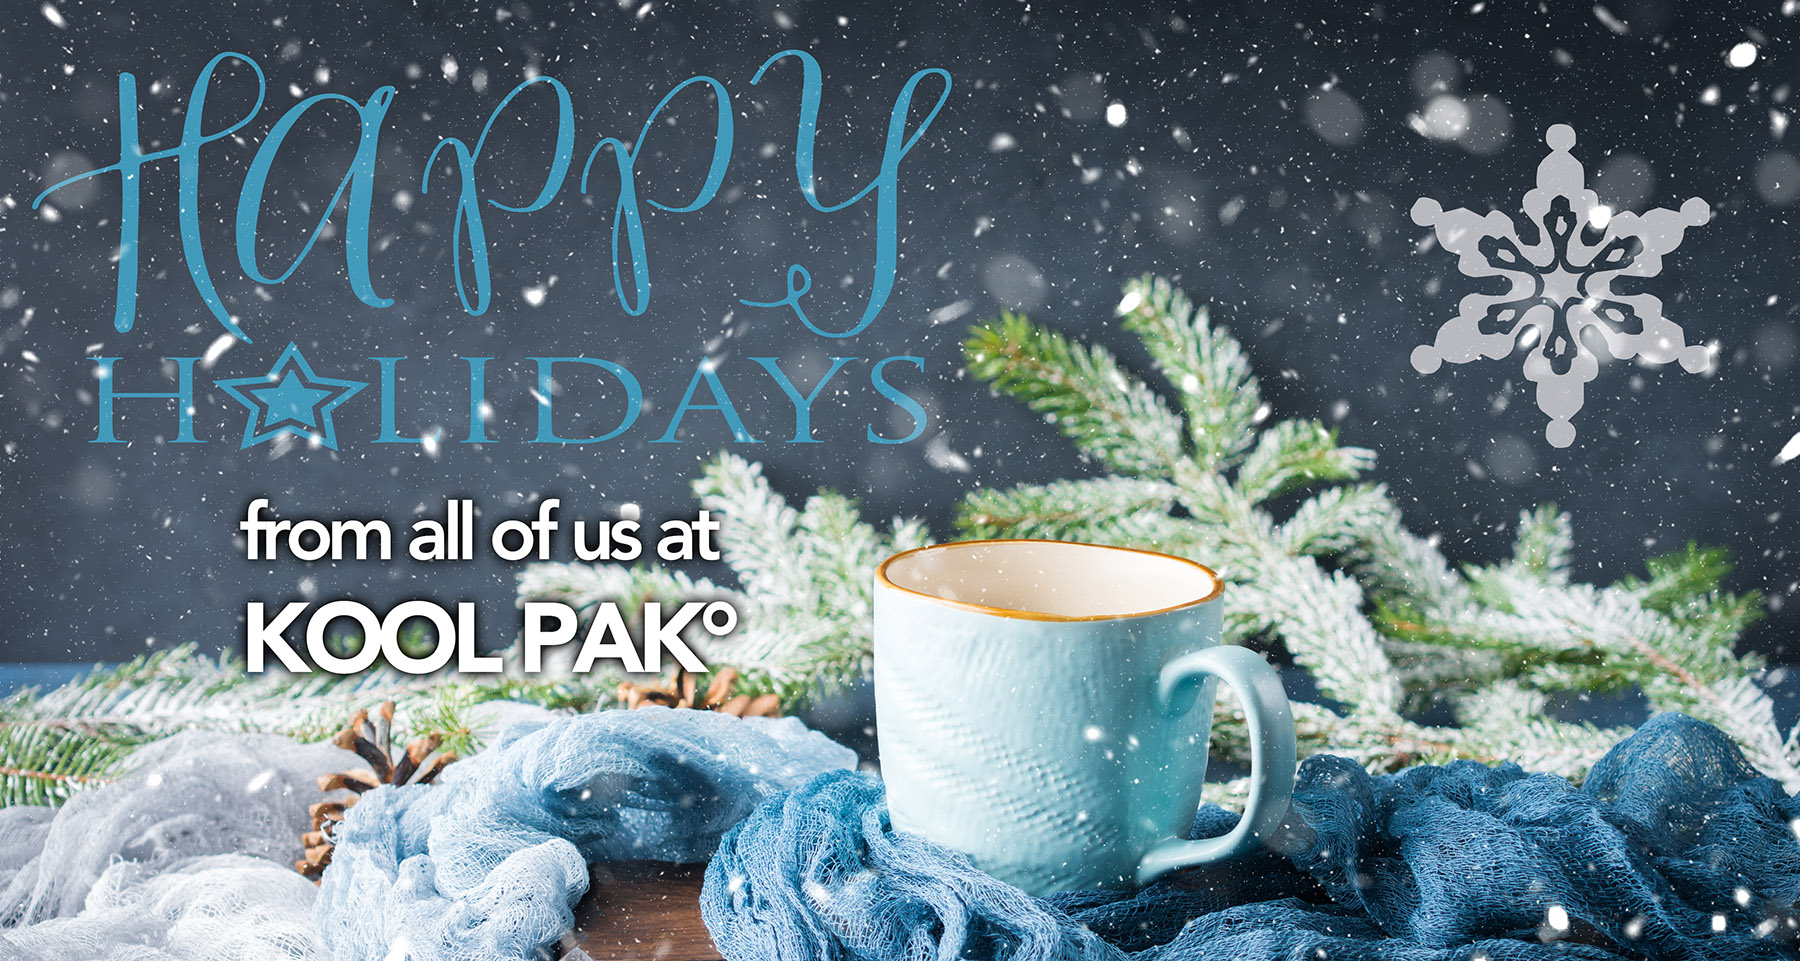 happy holidays from all of us at kool pak°